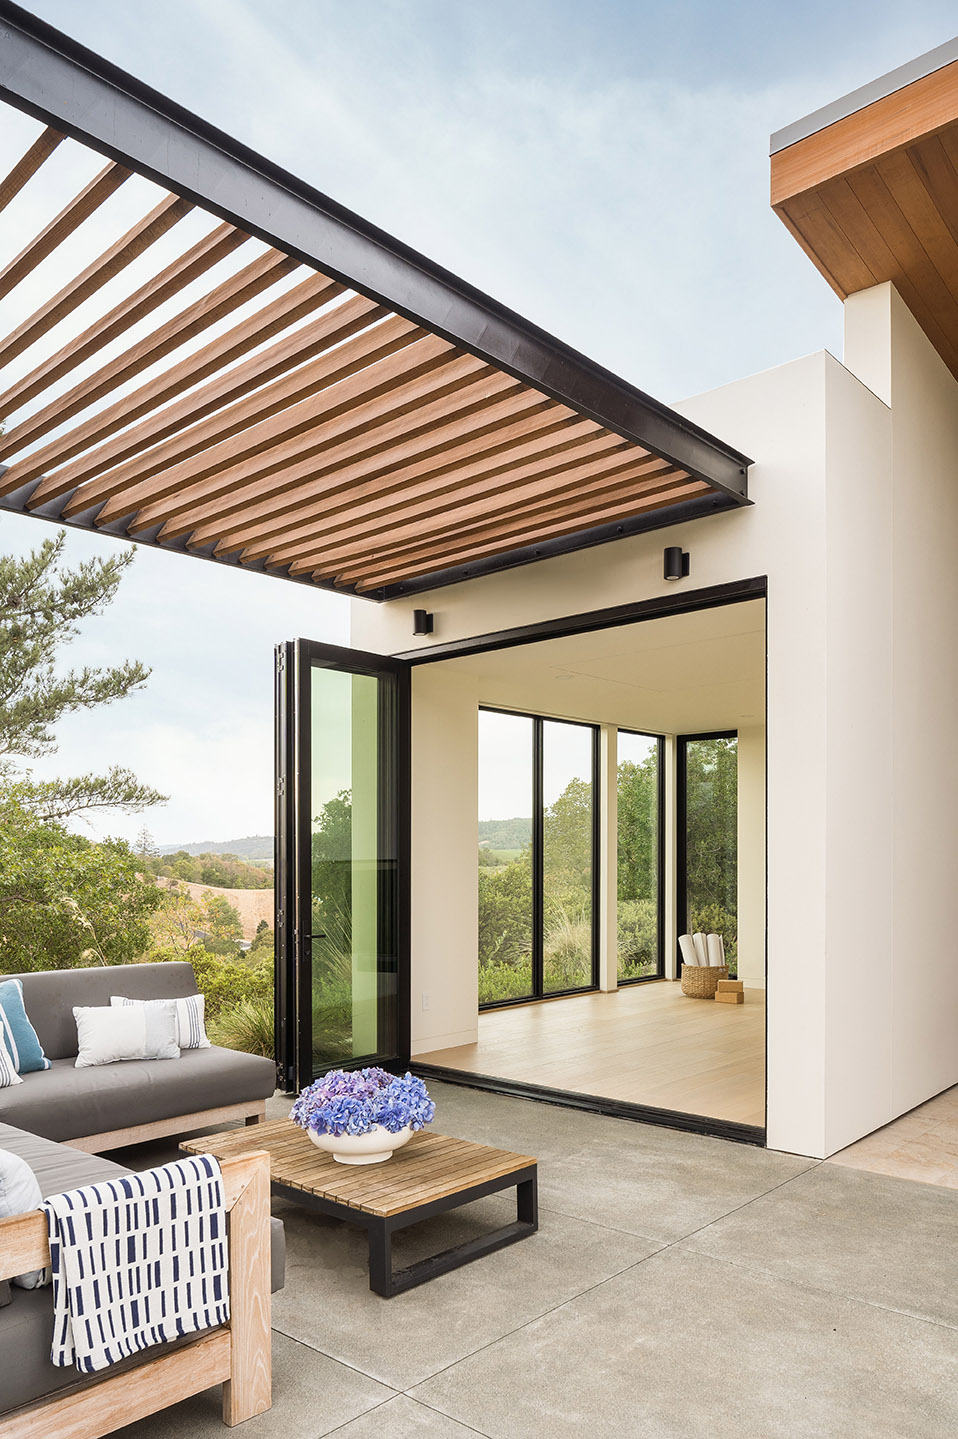 A modern, metal wrapped pergola provides shade for the outdoor seating area in front of an open bi-fold door.